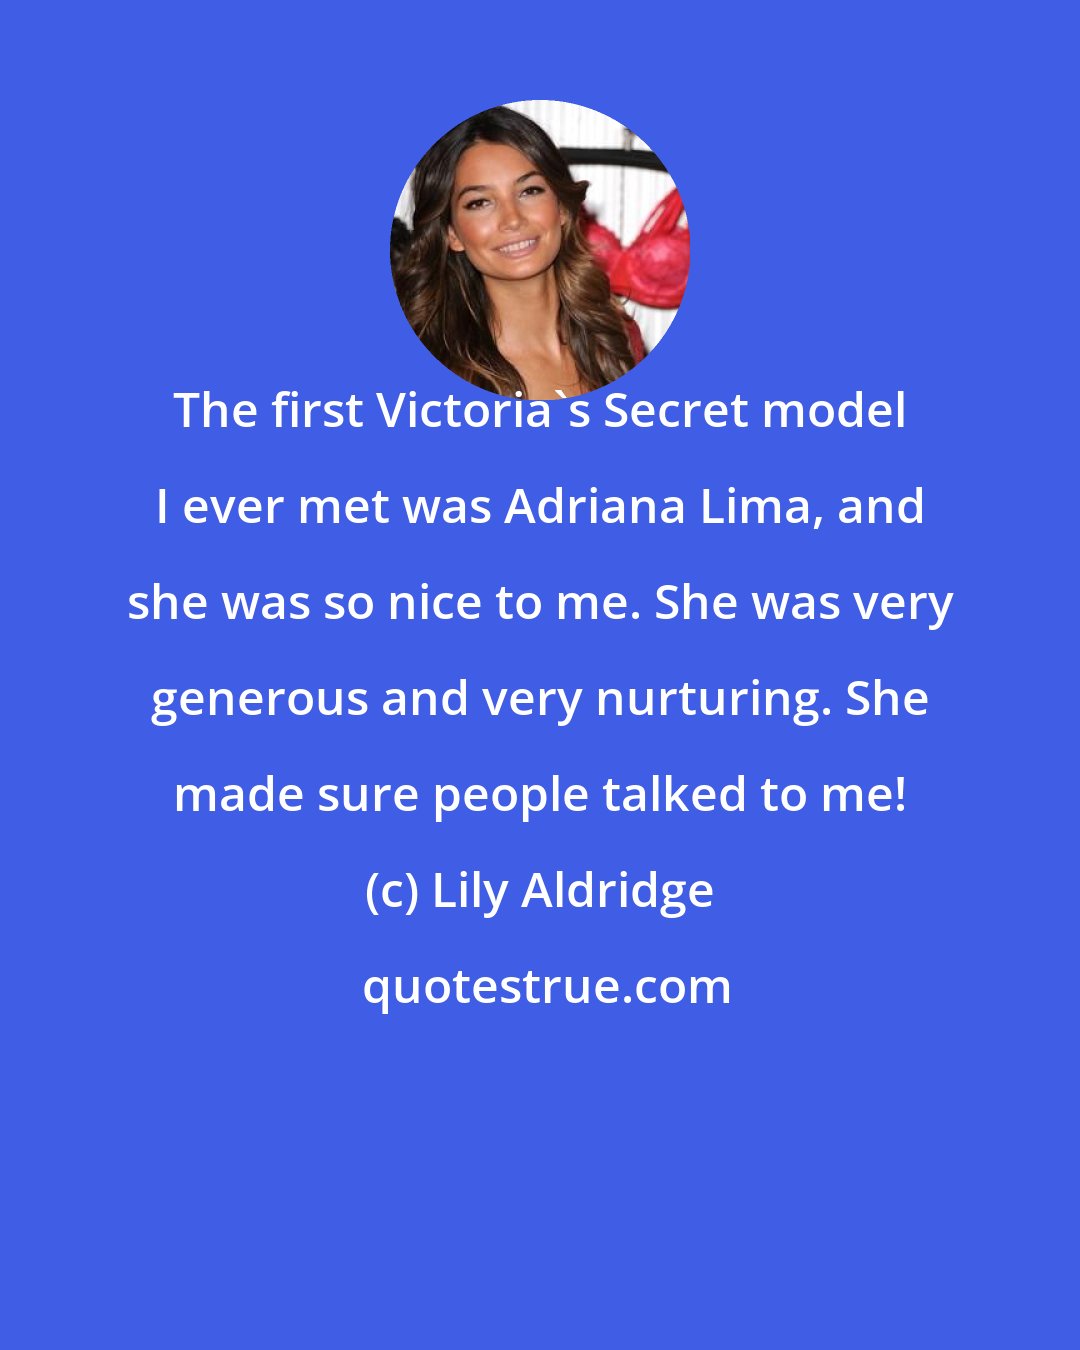 Lily Aldridge: The first Victoria's Secret model I ever met was Adriana Lima, and she was so nice to me. She was very generous and very nurturing. She made sure people talked to me!